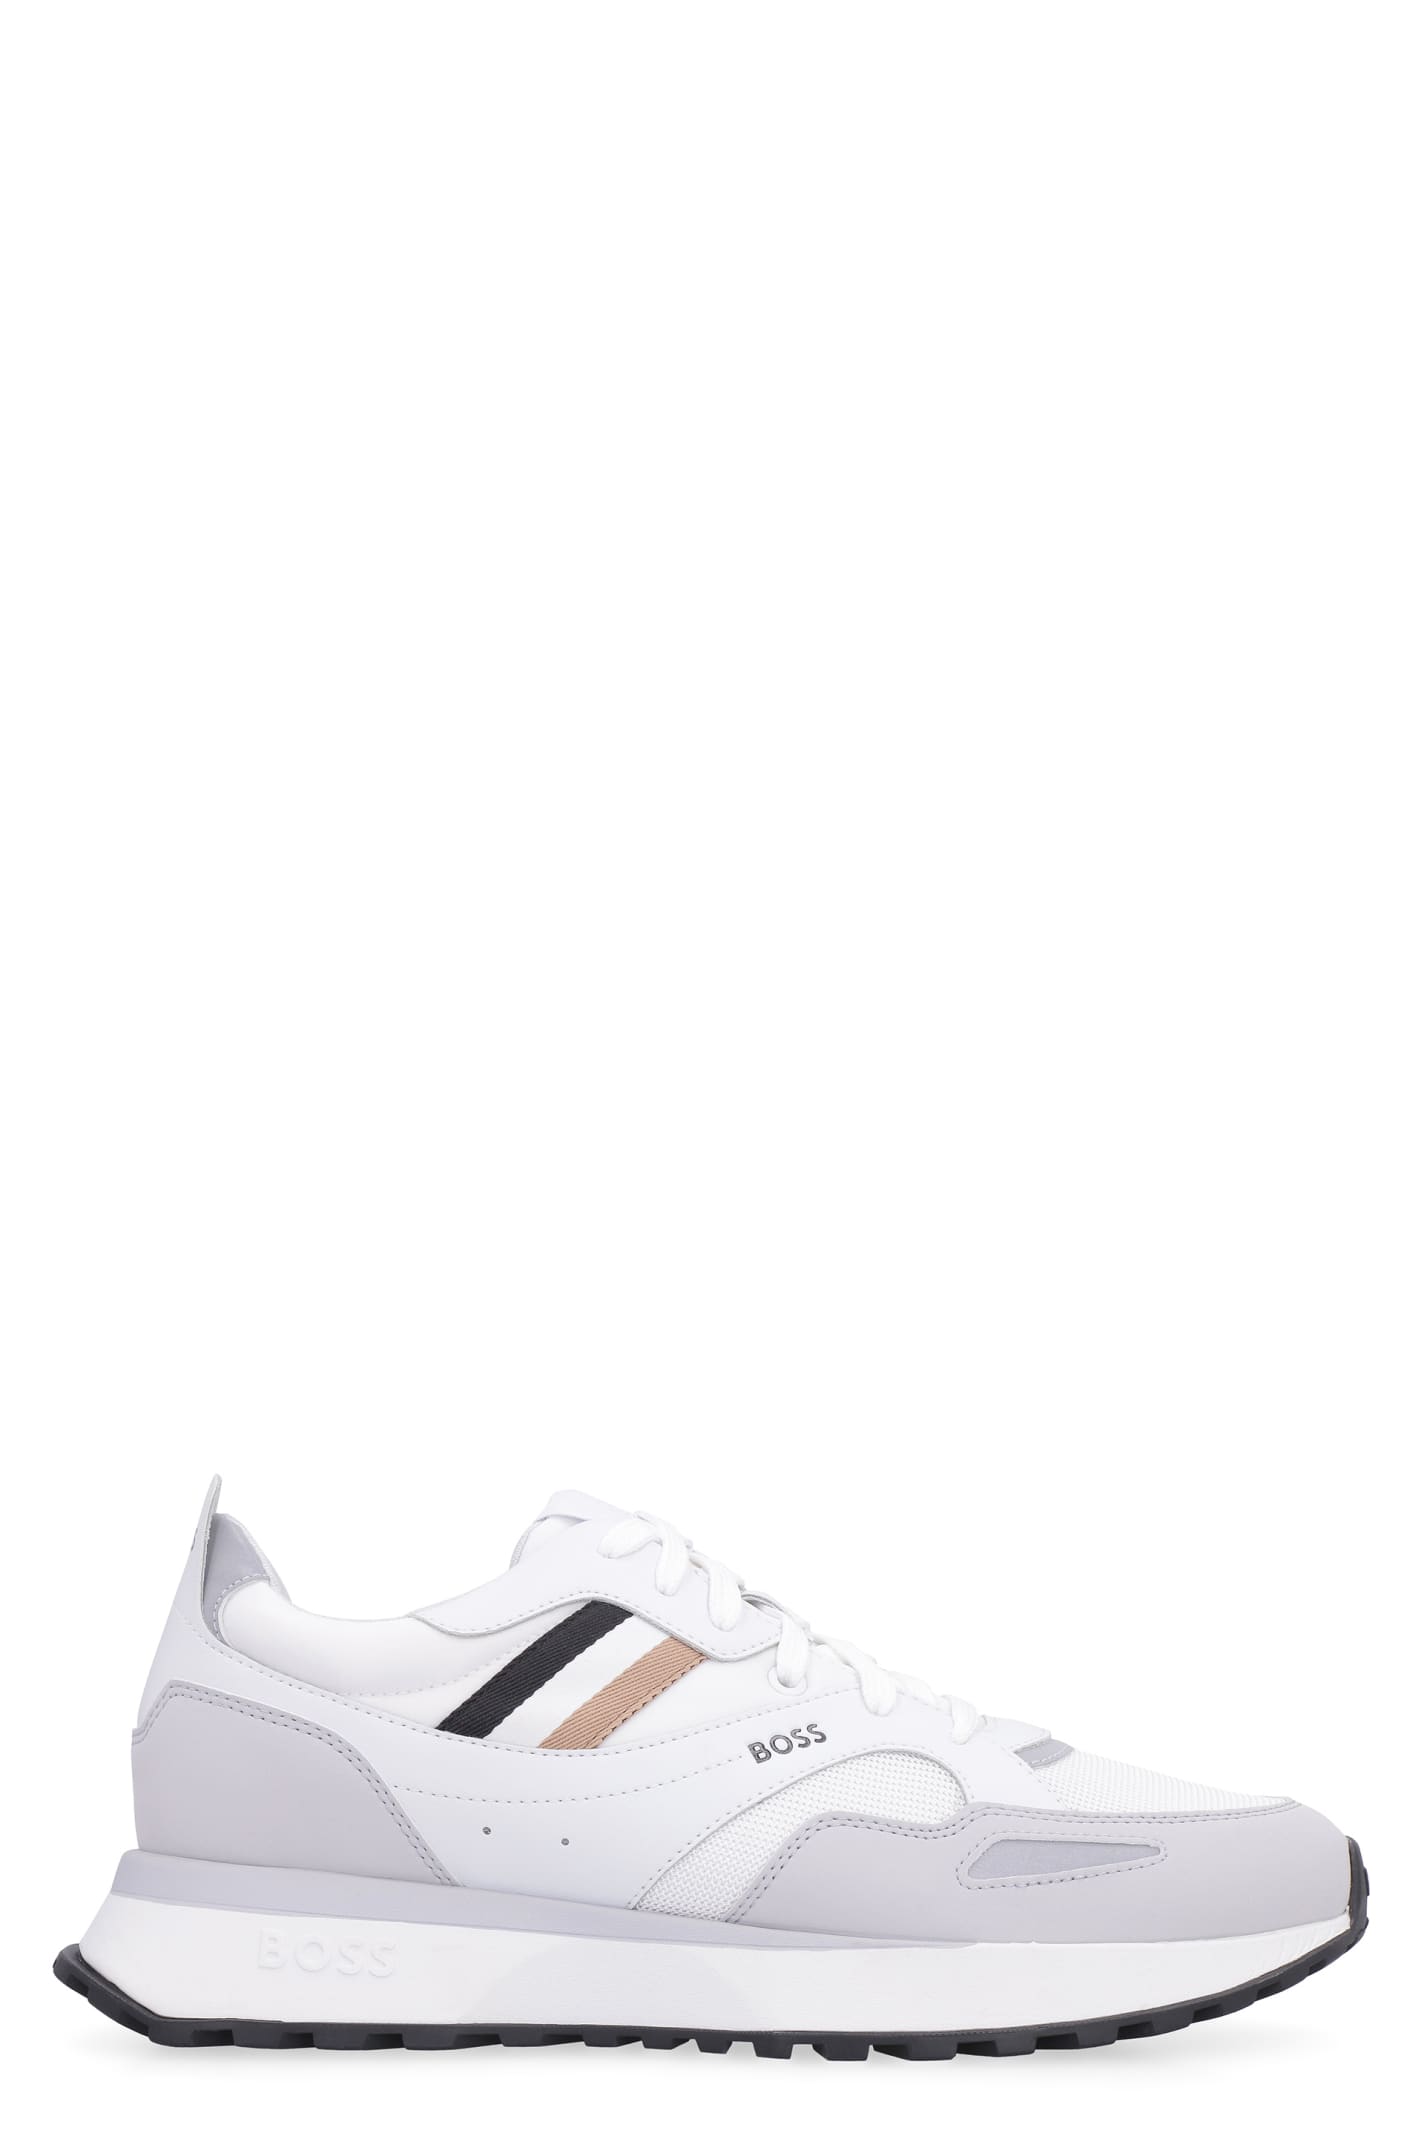 Hugo Boss Leather And Fabric Low-top Sneakers